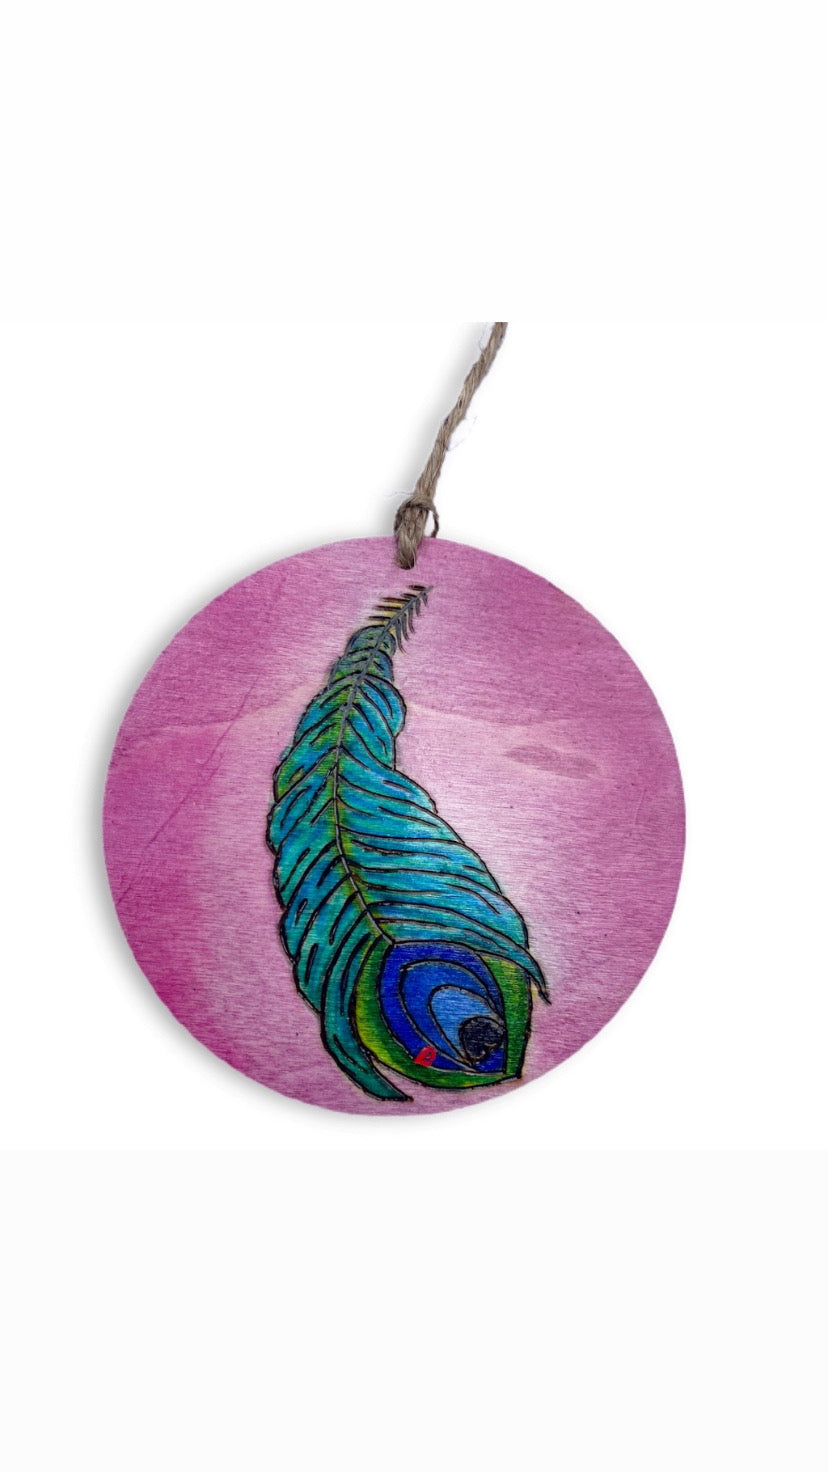 Peacock feather ornament blue green teal pink